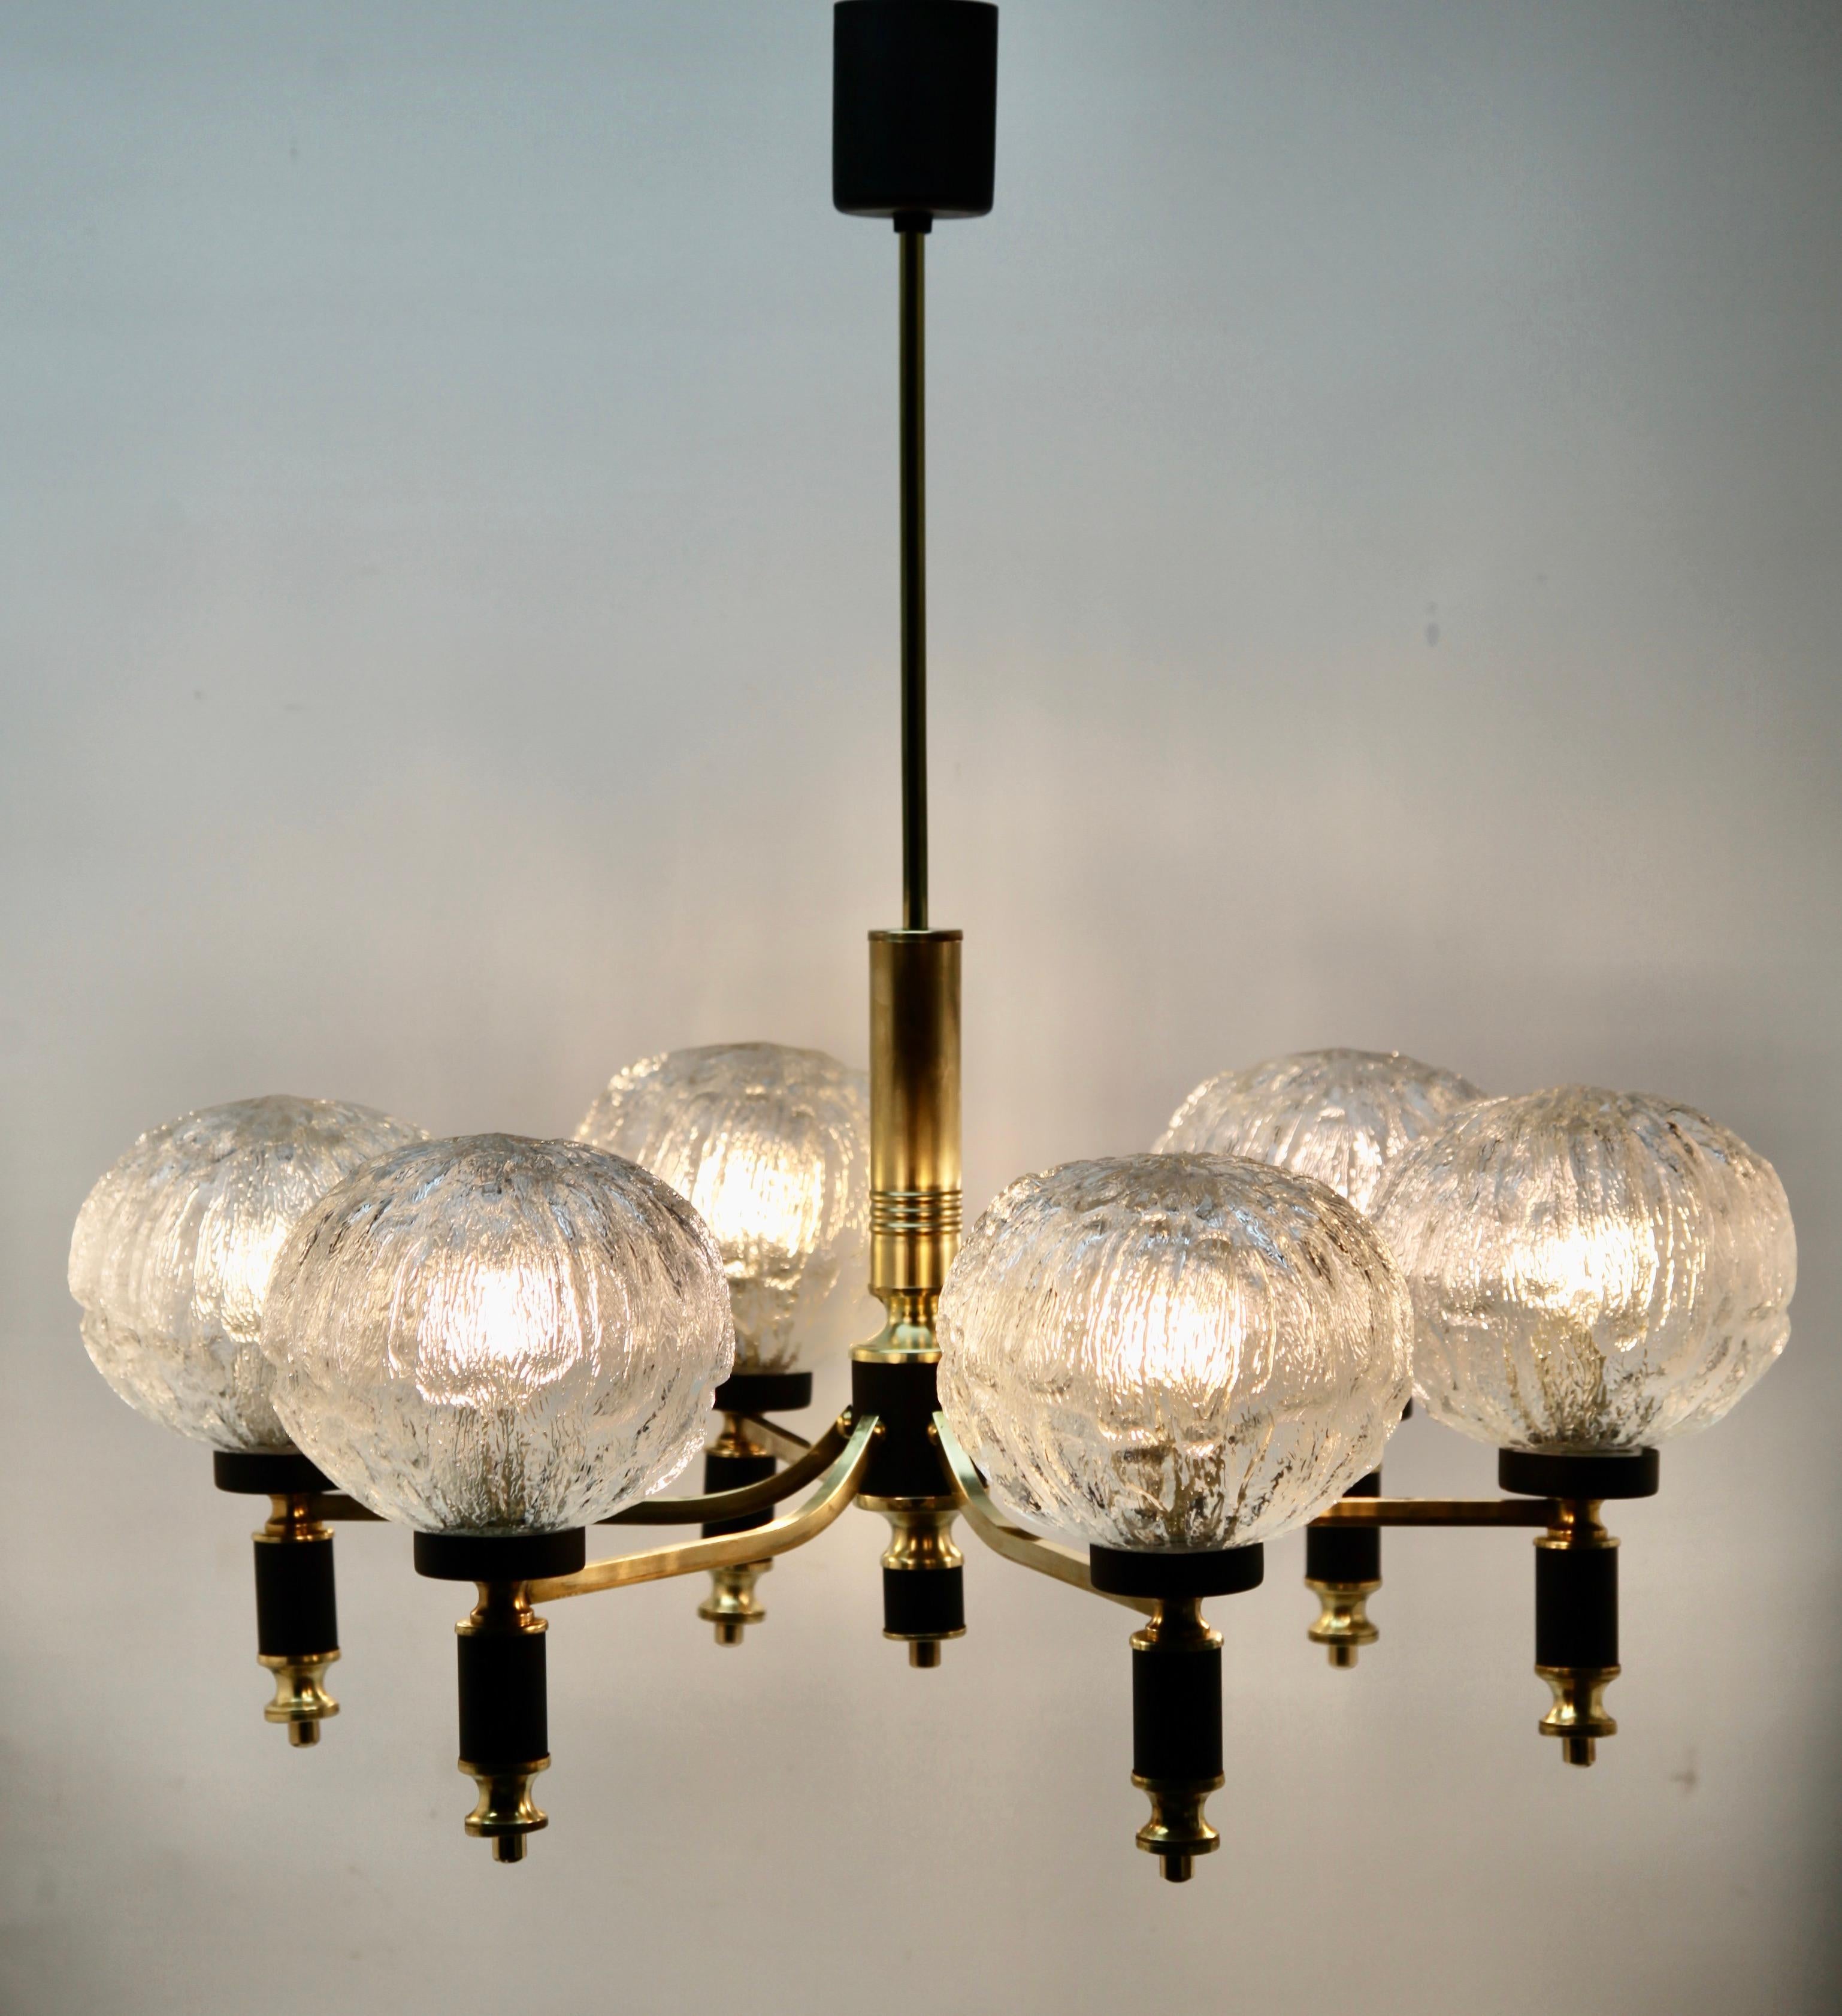 Mid-20th Century Vintage Chandelier in the Style of Stilnovo 6 Arms, Italian, 1960s